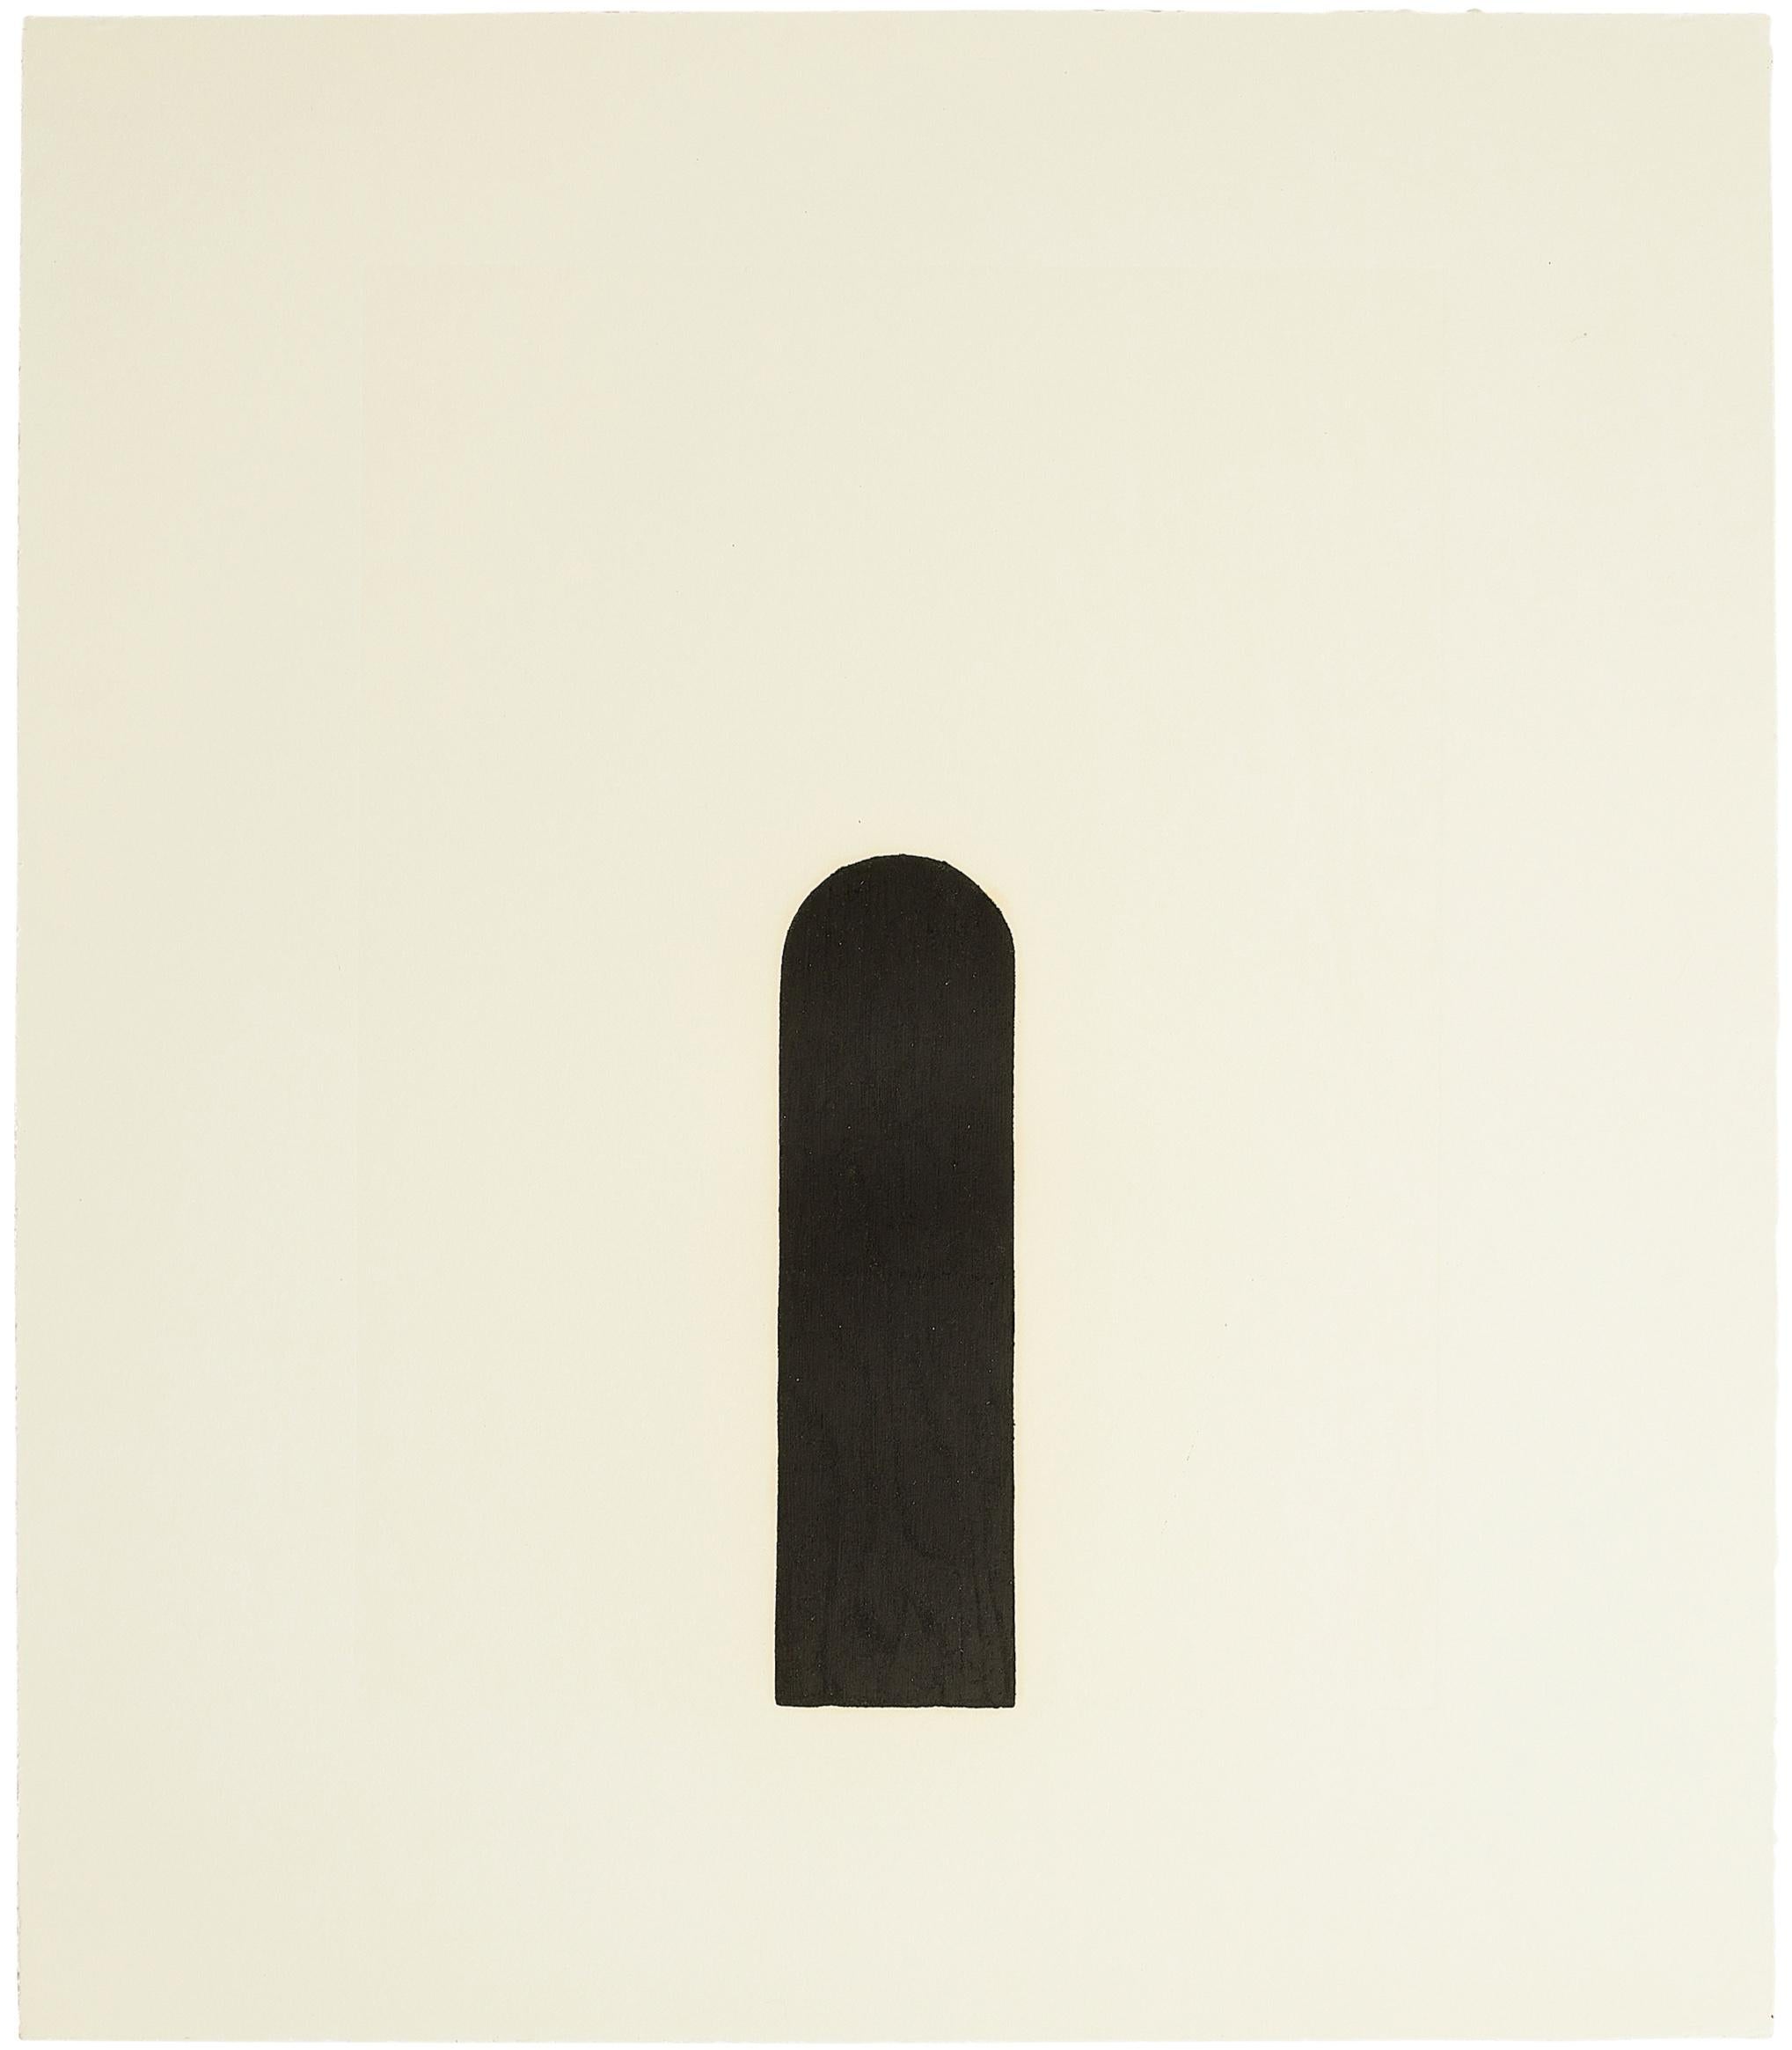 Bearing Light II, 1990
Antony Gormley

Woodcut printed with artist’s oil colour and various clays, on Stonehenge wove
Signed, titled, dated and numbered from the edition of 30 verso
Printed by La Paloma, Tujunga
Published by Okeanos Editions, Los